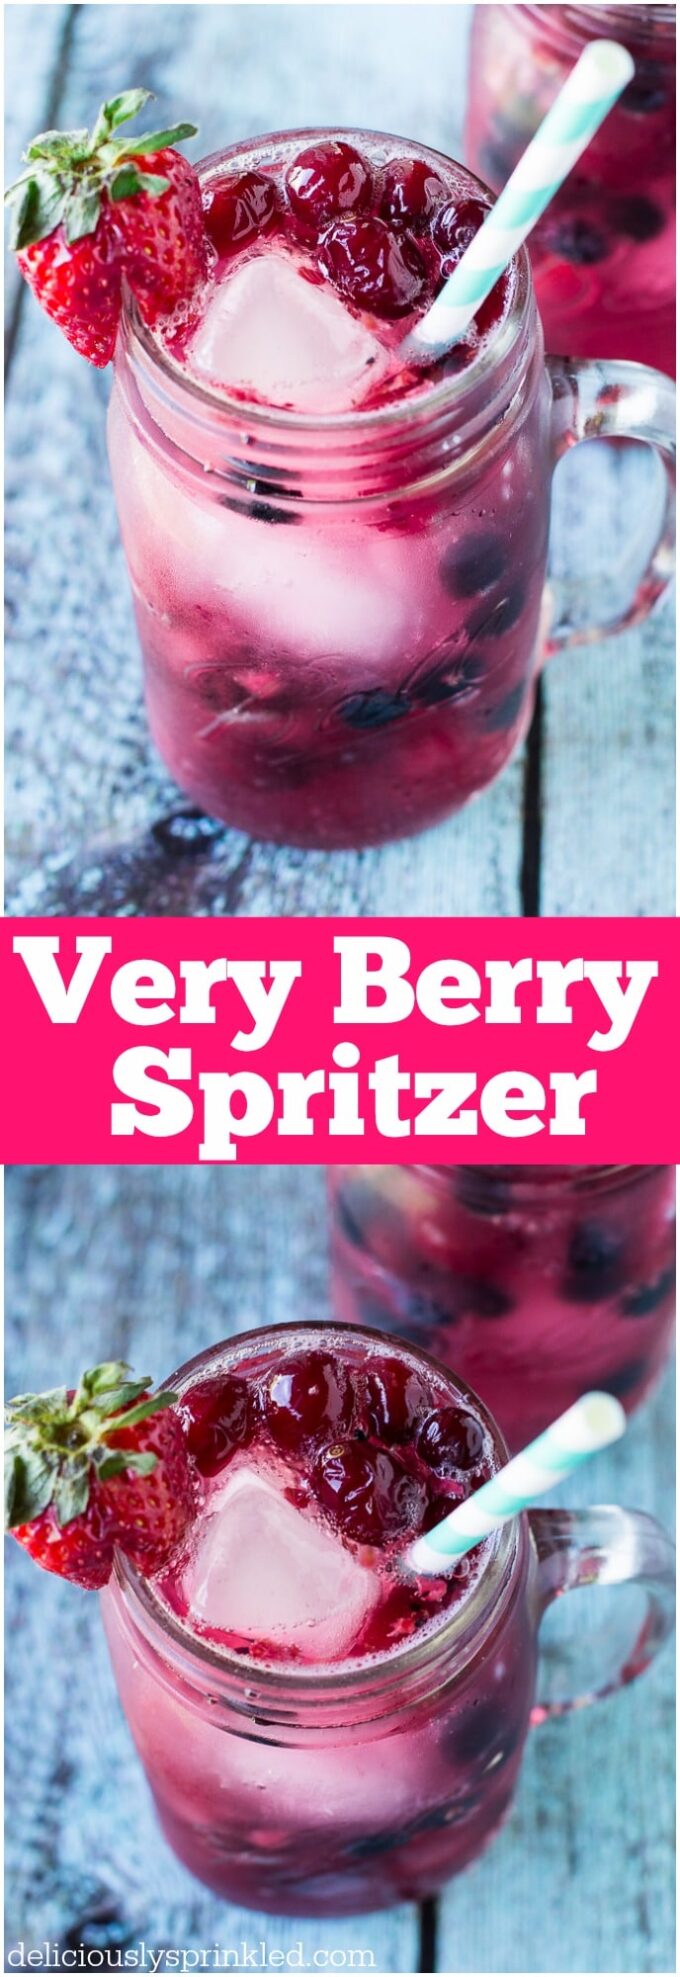 Very Berry Spritzer - Deliciously Sprinkled